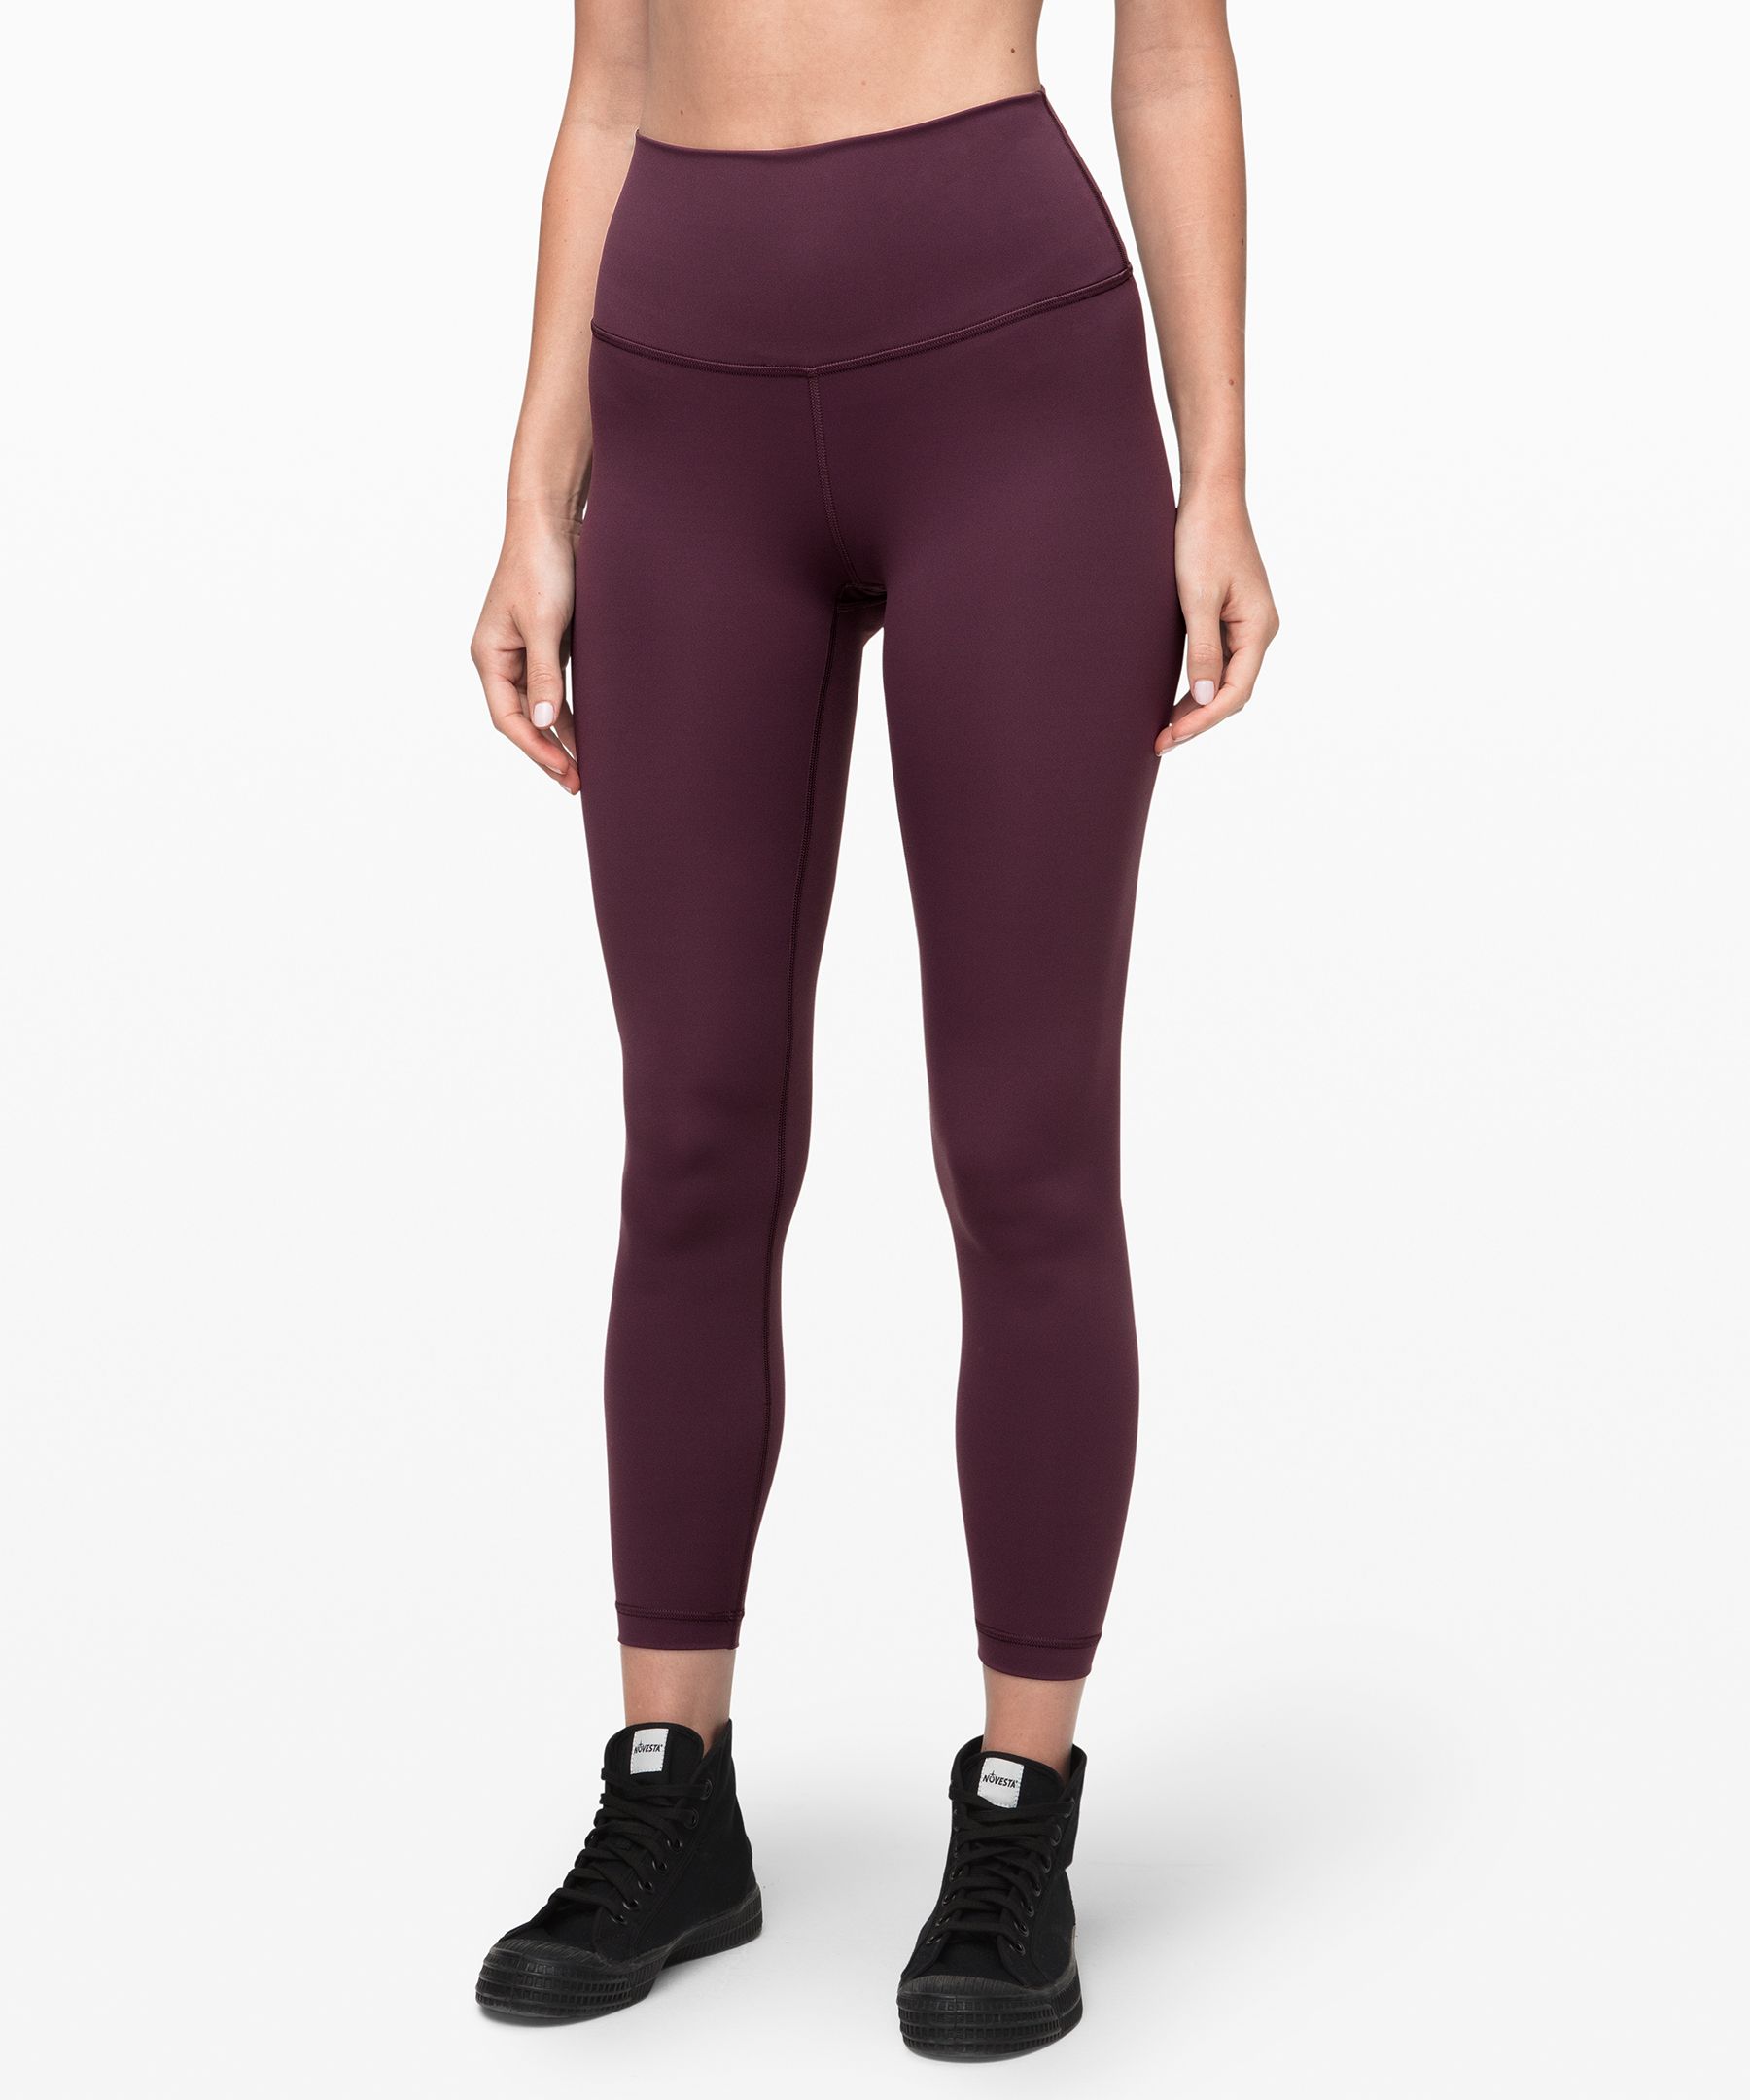 Lululemon Leggings With Sign On Legs  International Society of Precision  Agriculture